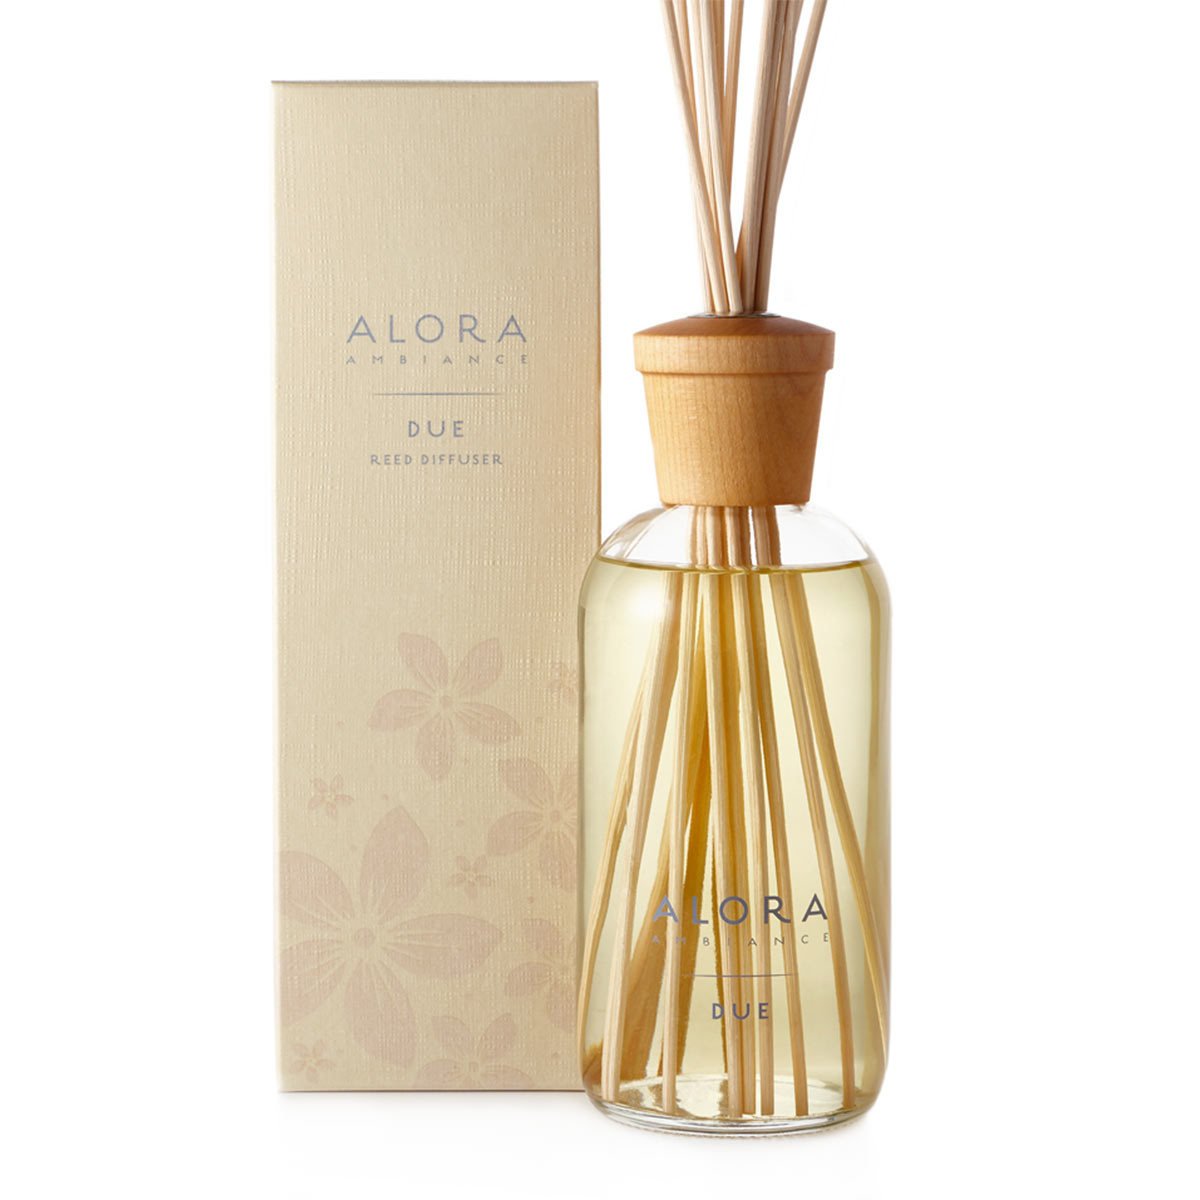 Due Reed Diffuser 16oz diffuser by Alora Ambiance